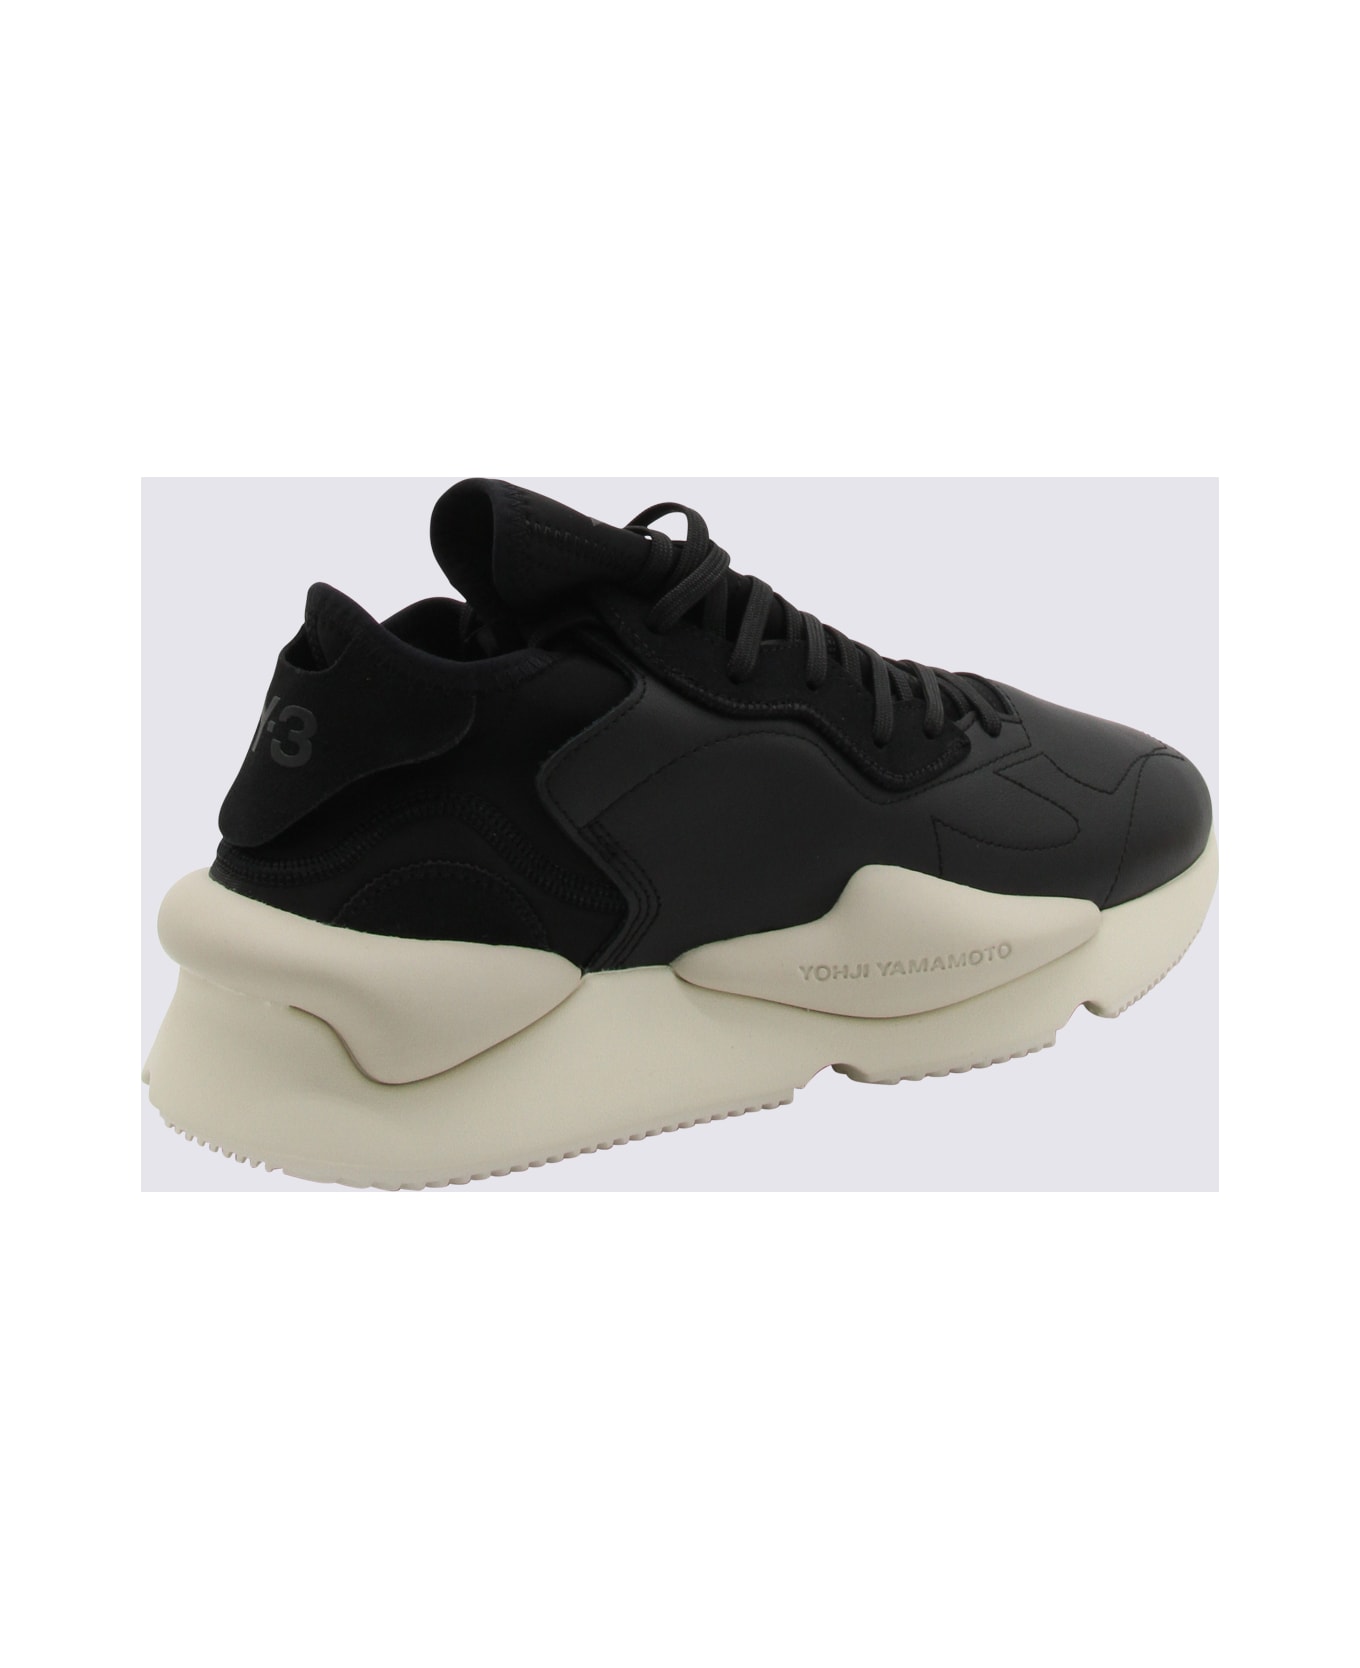 Y-3 Black And White Leather Kaiwa Sneakers - BLACK/OFF WHITE/CLEAR BROWN スニーカー